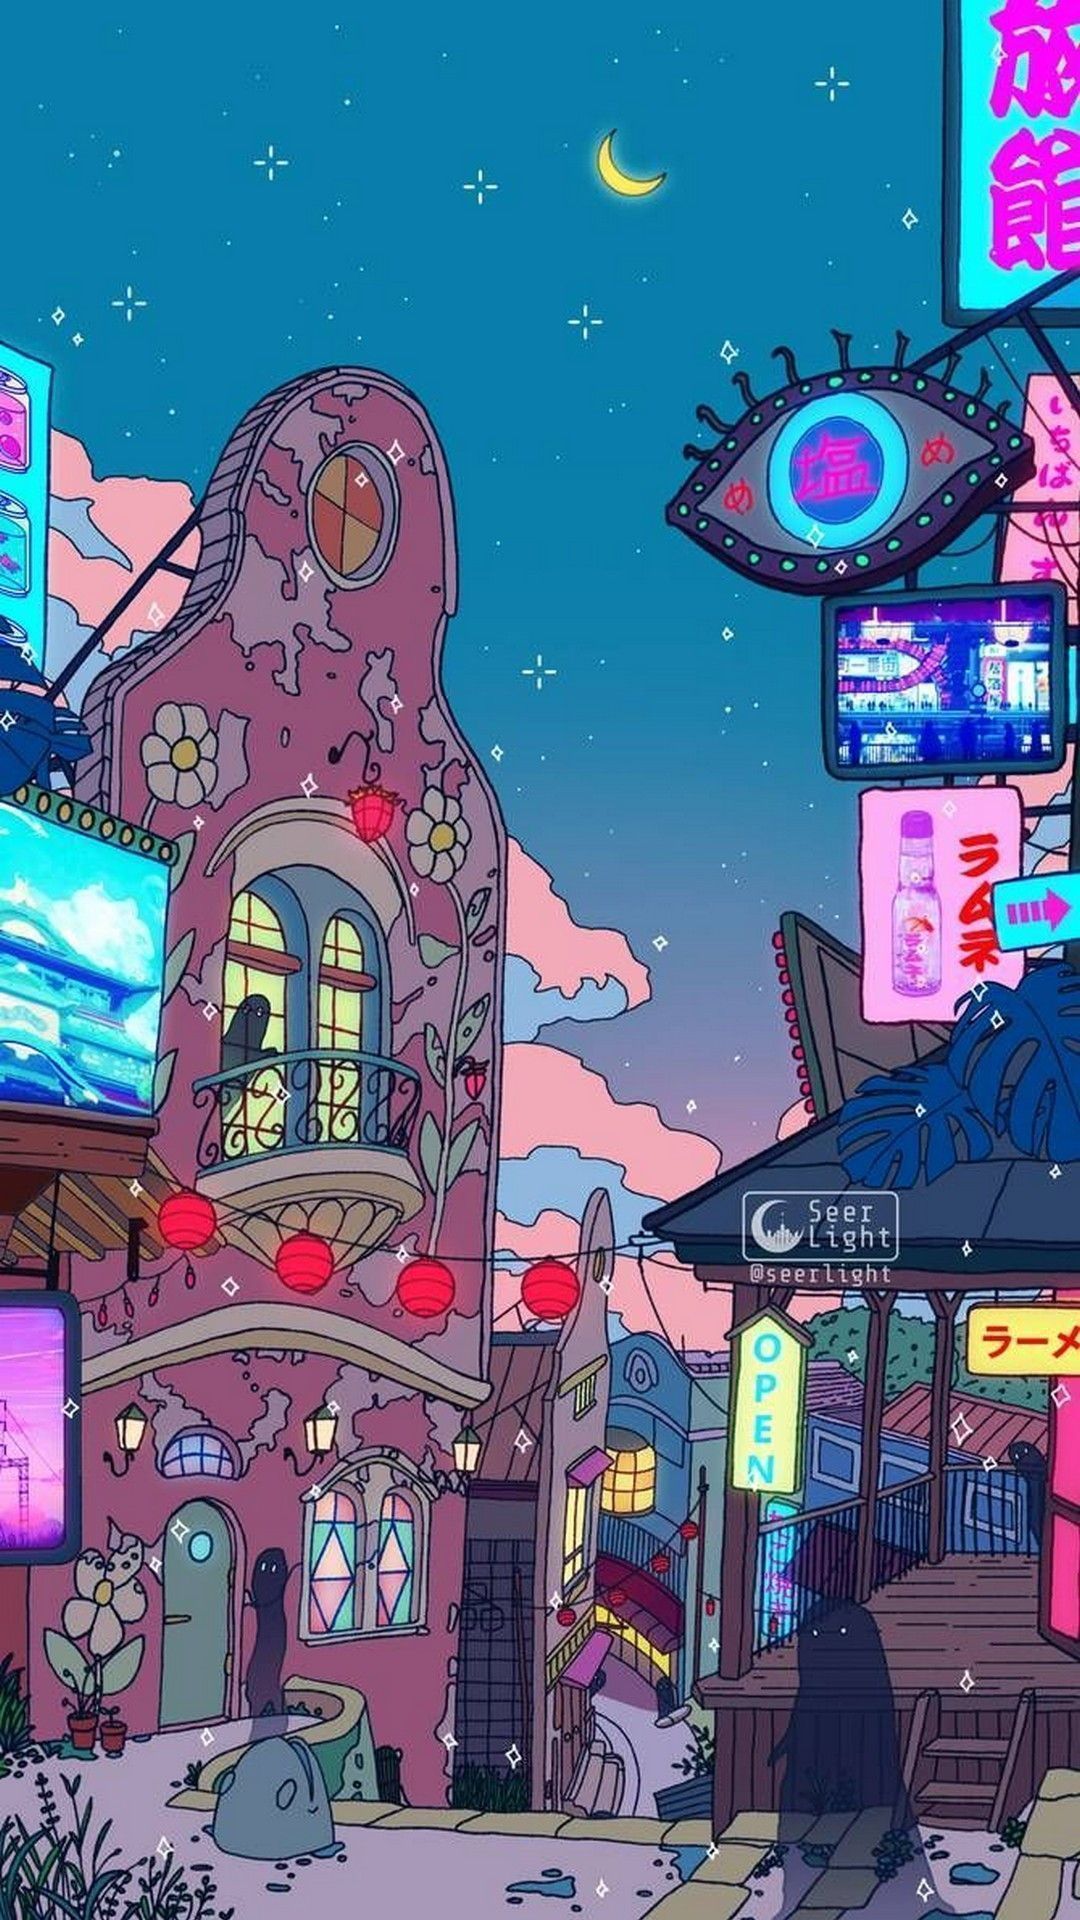 Aesthetic anime phone wallpaper of a cyberpunk city at night - Android, blue anime, anime